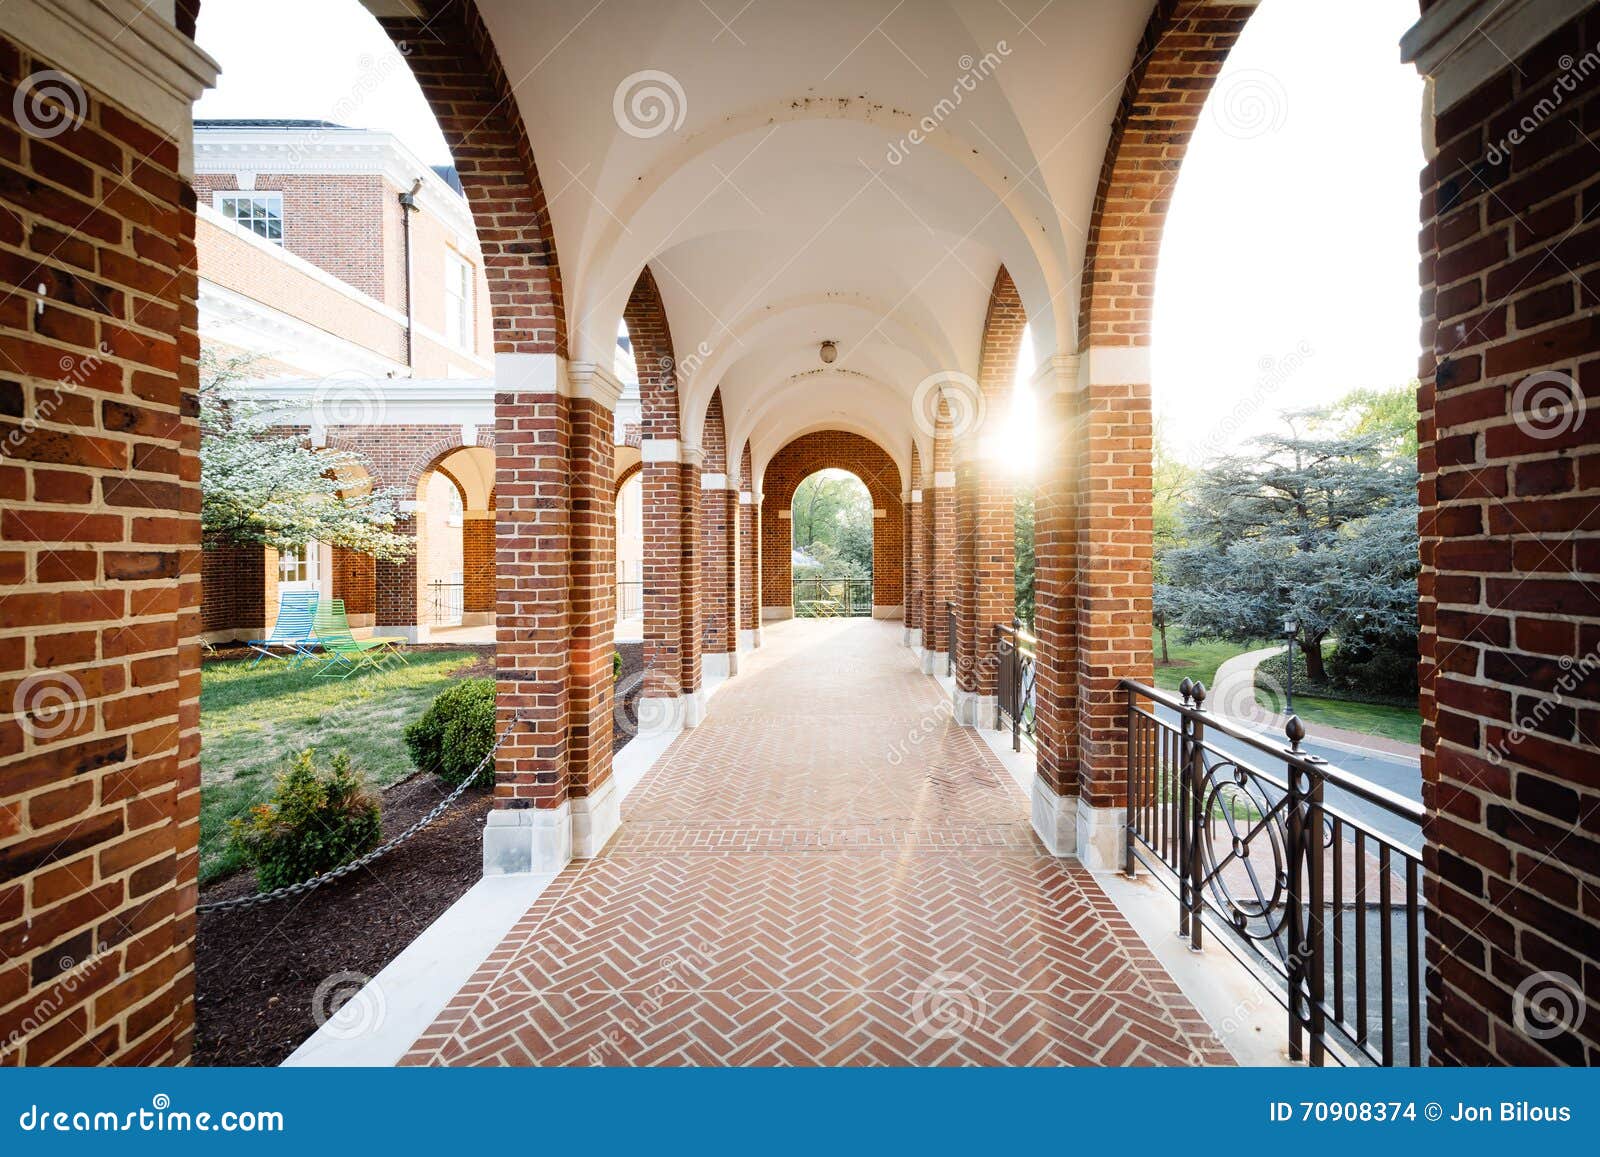 arched corridor at johns hopkins university, in baltimore, maryland.